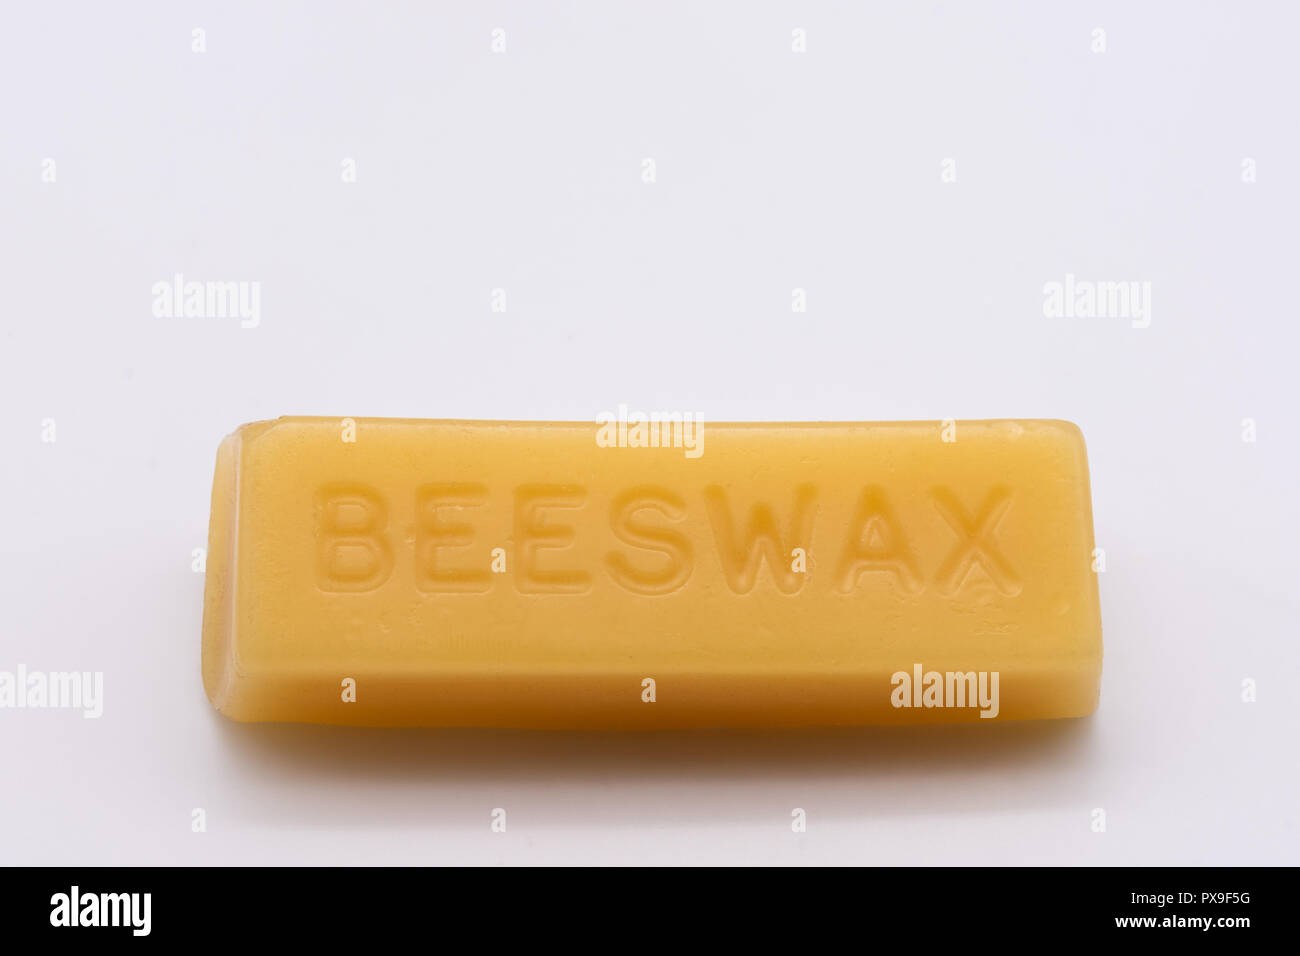 Beeswax block, 'mind your own beeswax', phrase from the 1930's Stock Photo